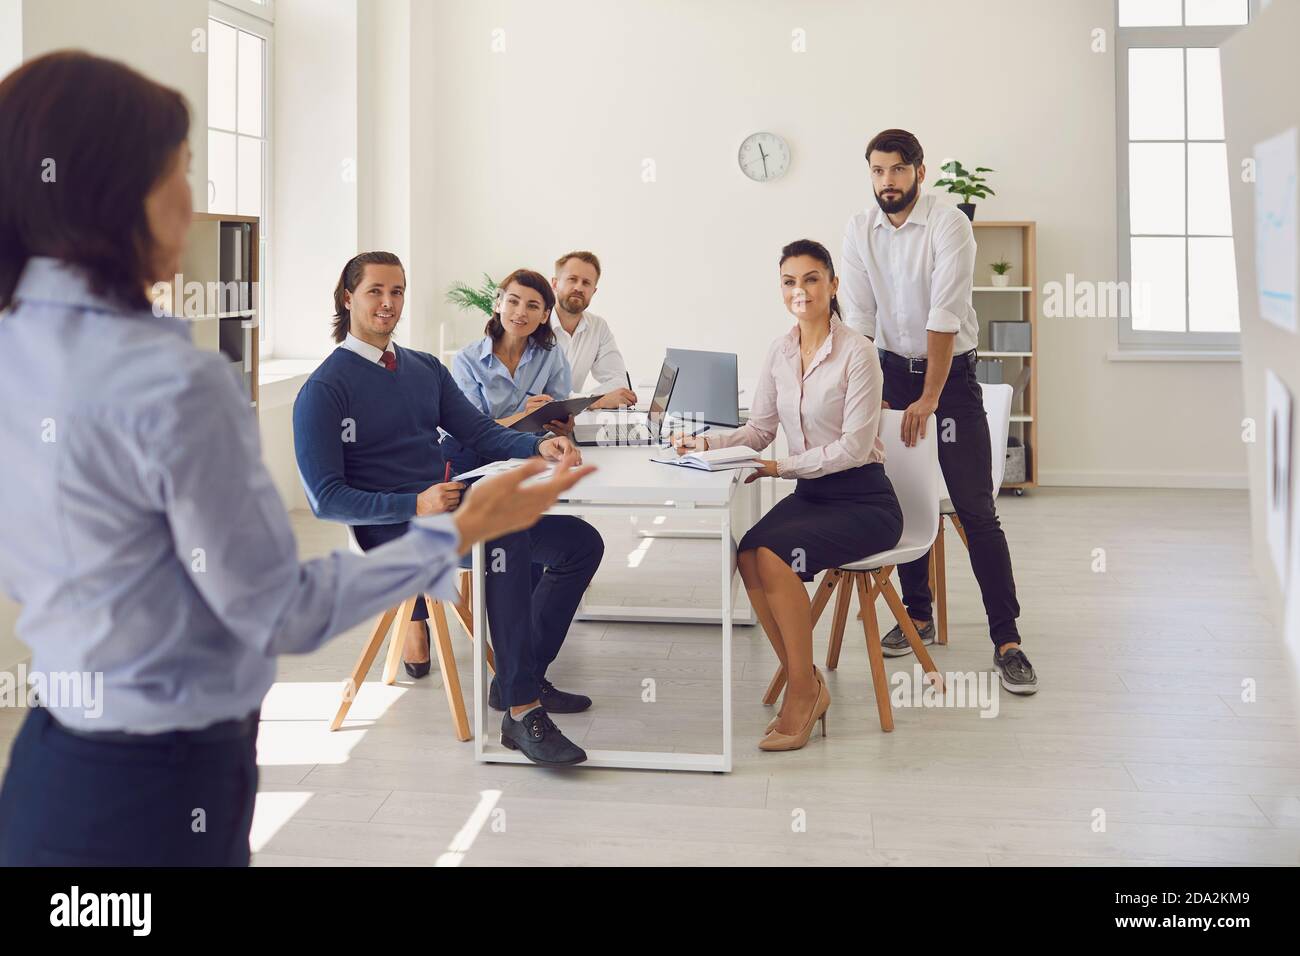 Group of business people in office looking at woman colleague presenting new project or startup idea Stock Photo